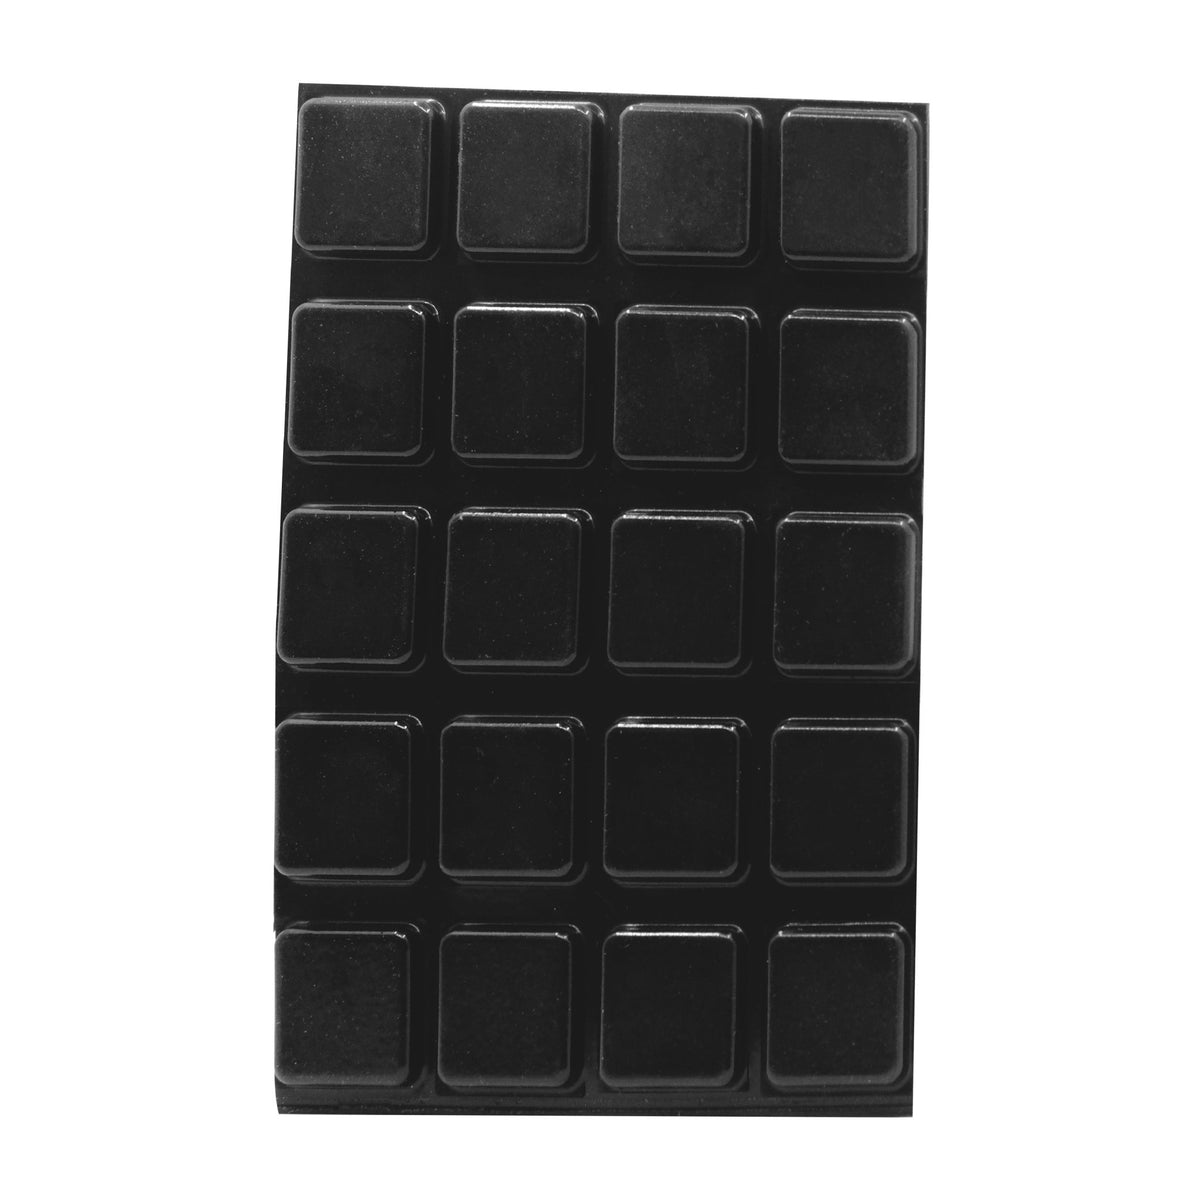 1 Inch Square .1875&quot; Height Black Adhesive Rubber Feet - BMP-SQ1BC - Picture Hang Solutions